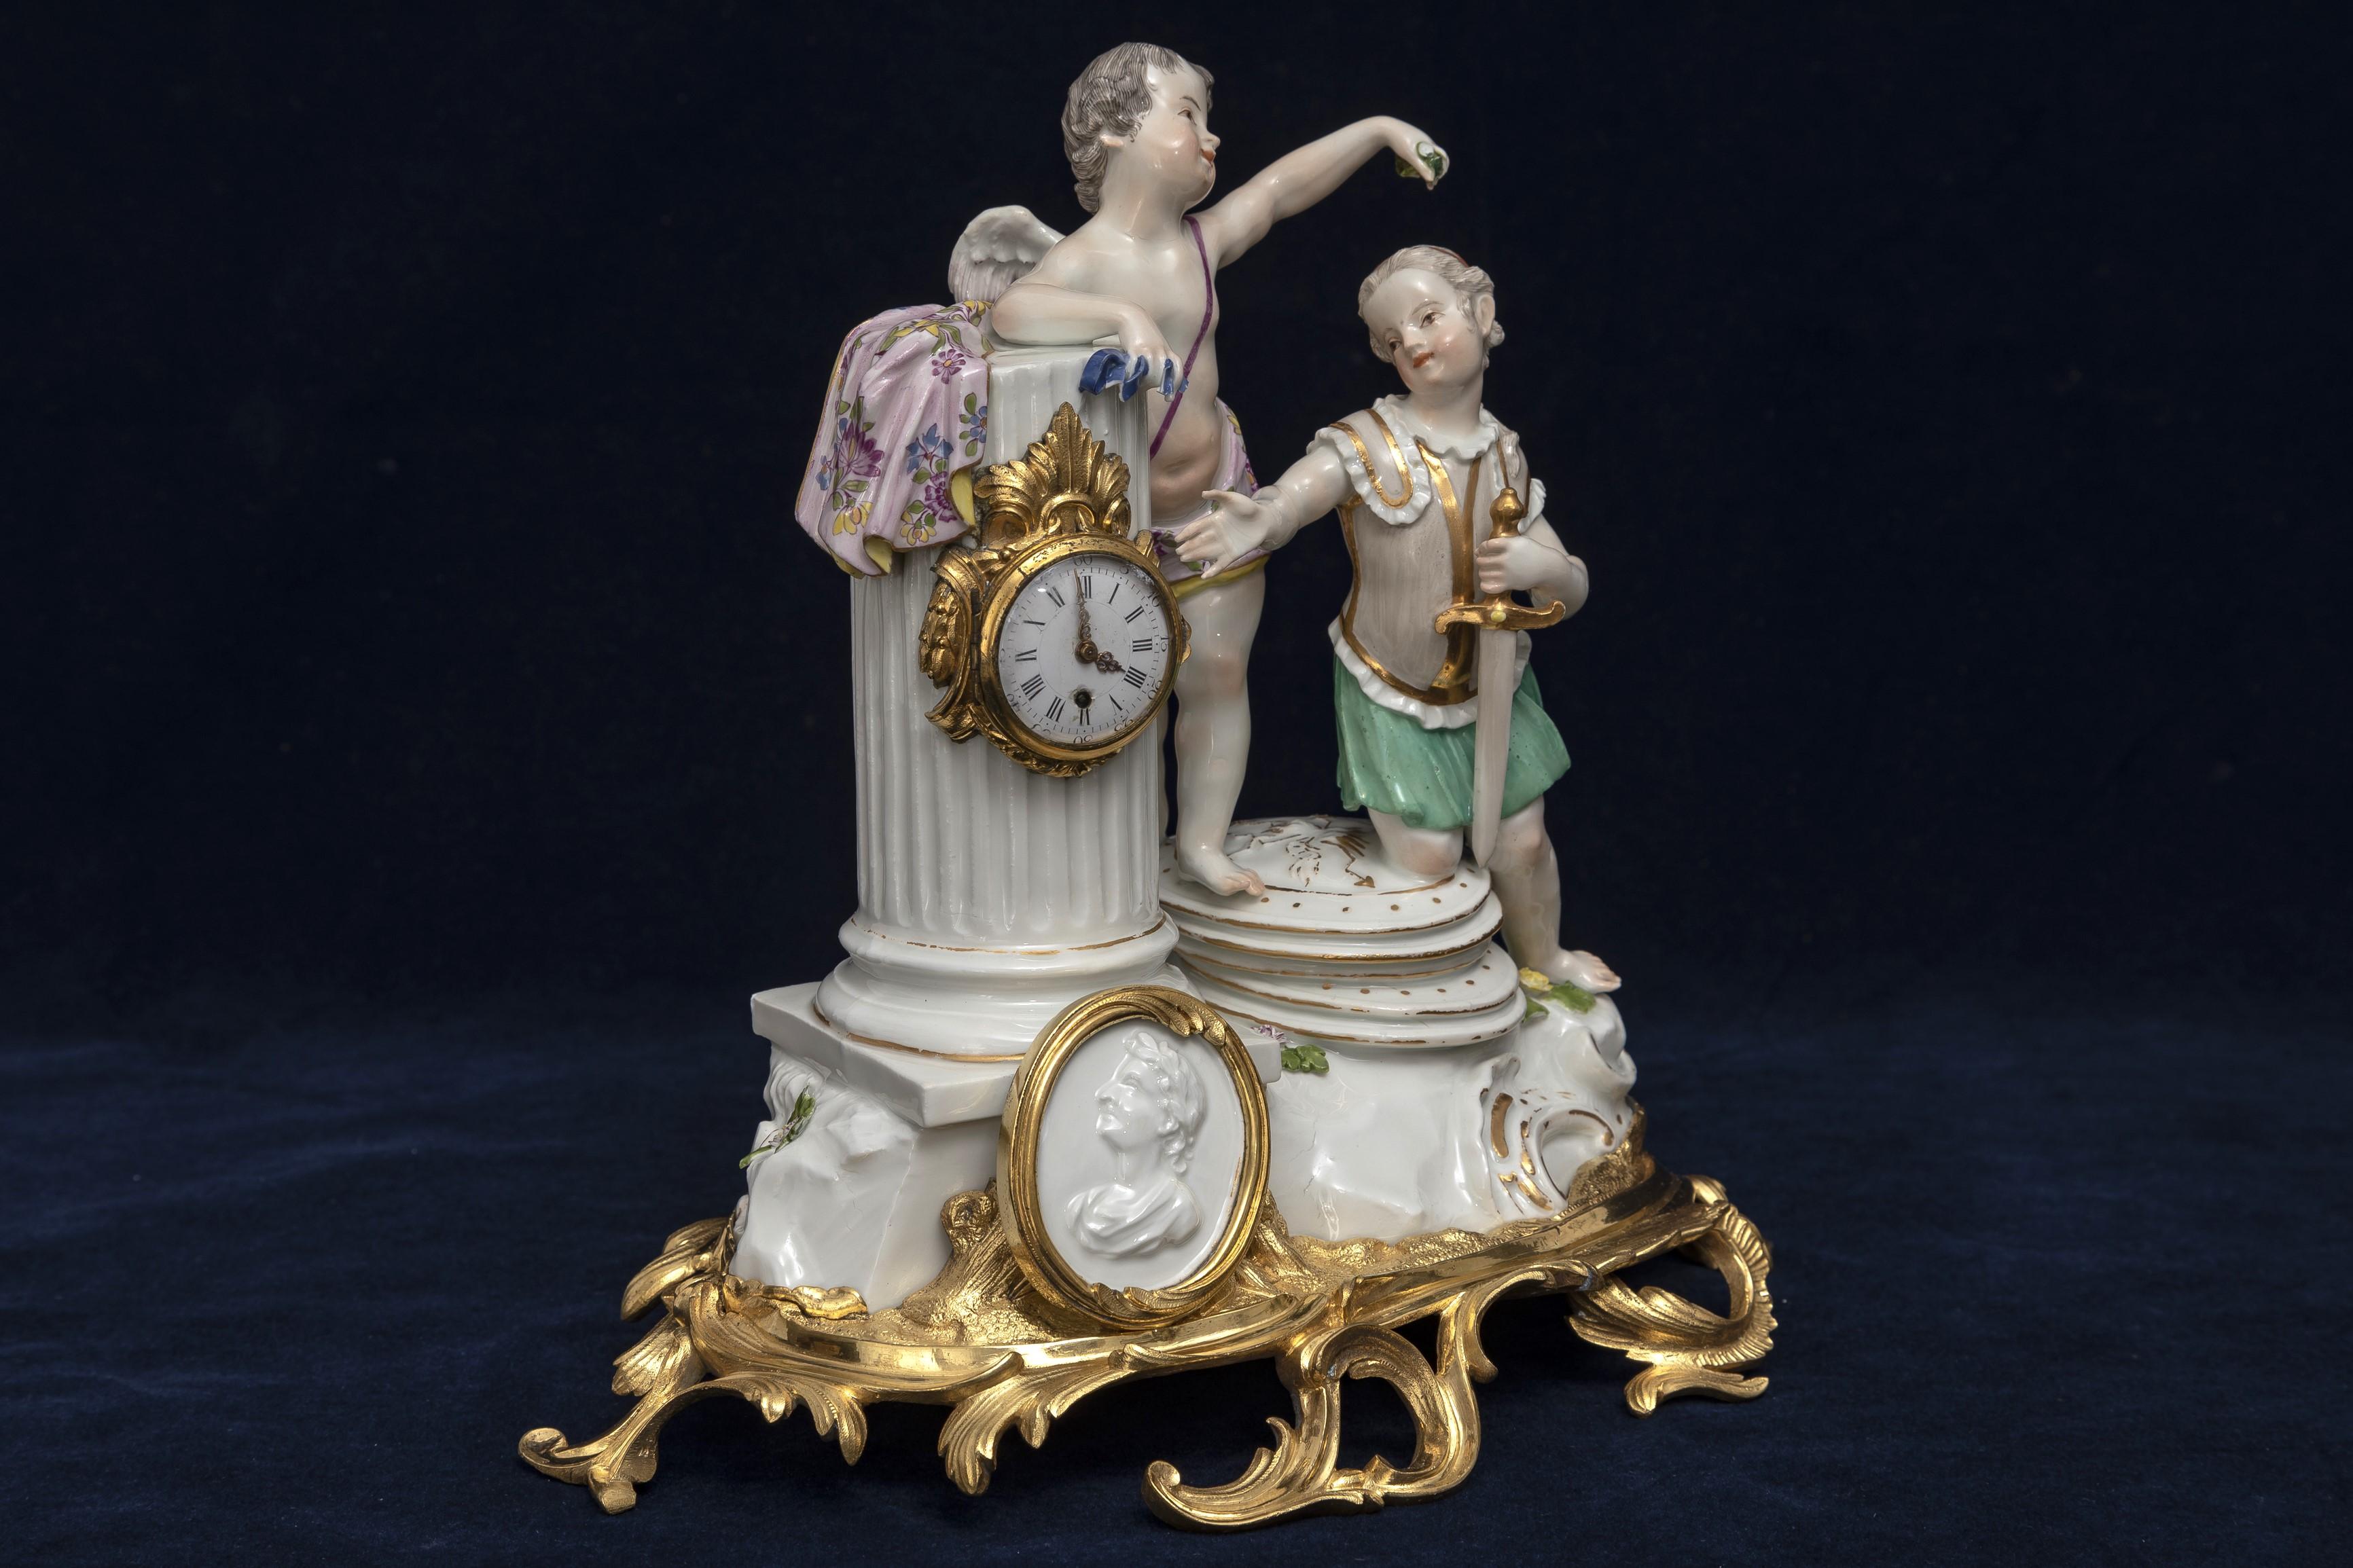 German An Important Rare 18th C. Ormolu Mounted Meissen Porcelain Putti Clock Grouping For Sale